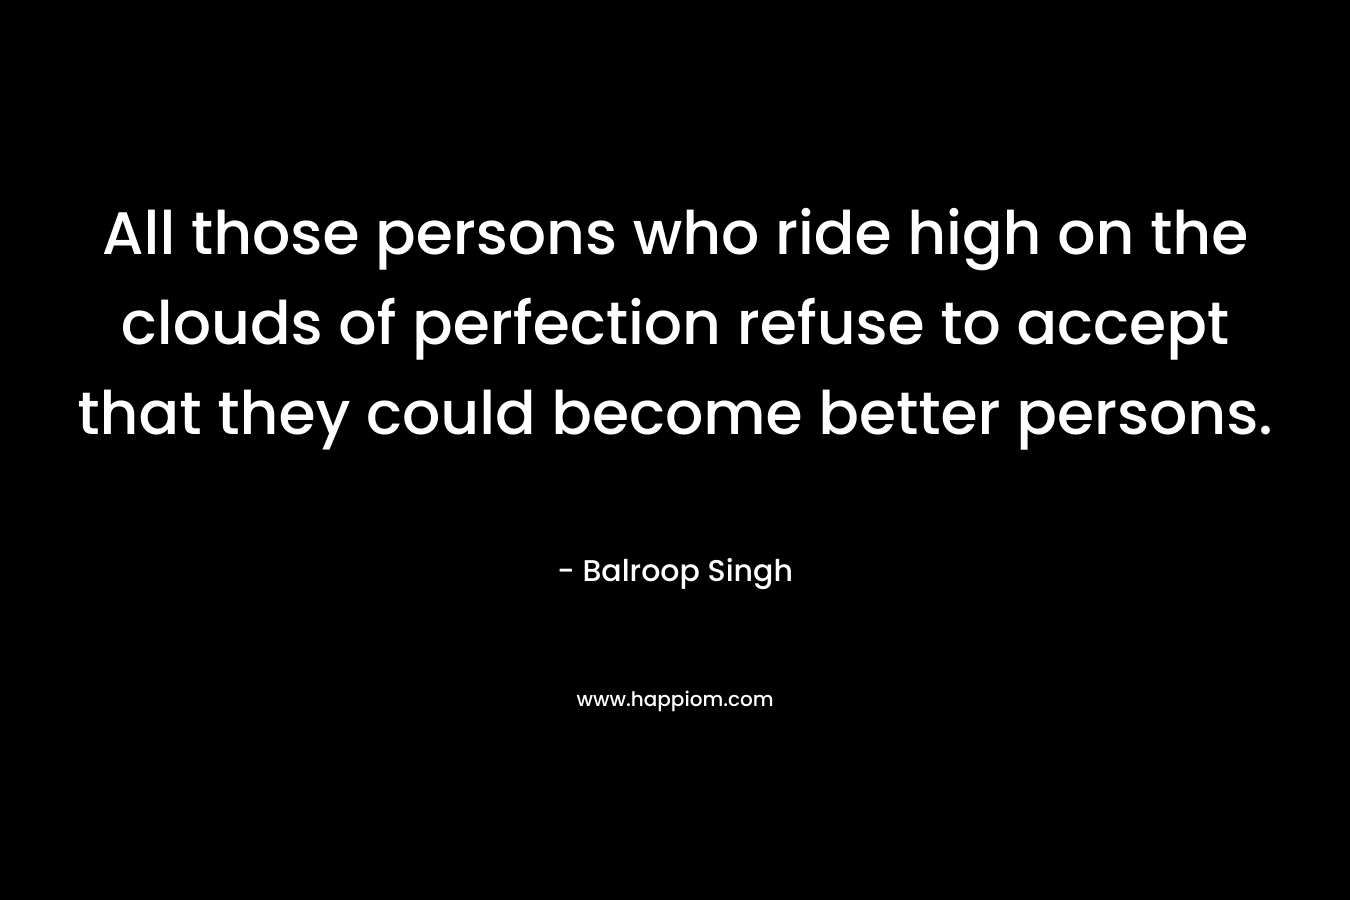 All those persons who ride high on the clouds of perfection refuse to accept that they could become better persons.